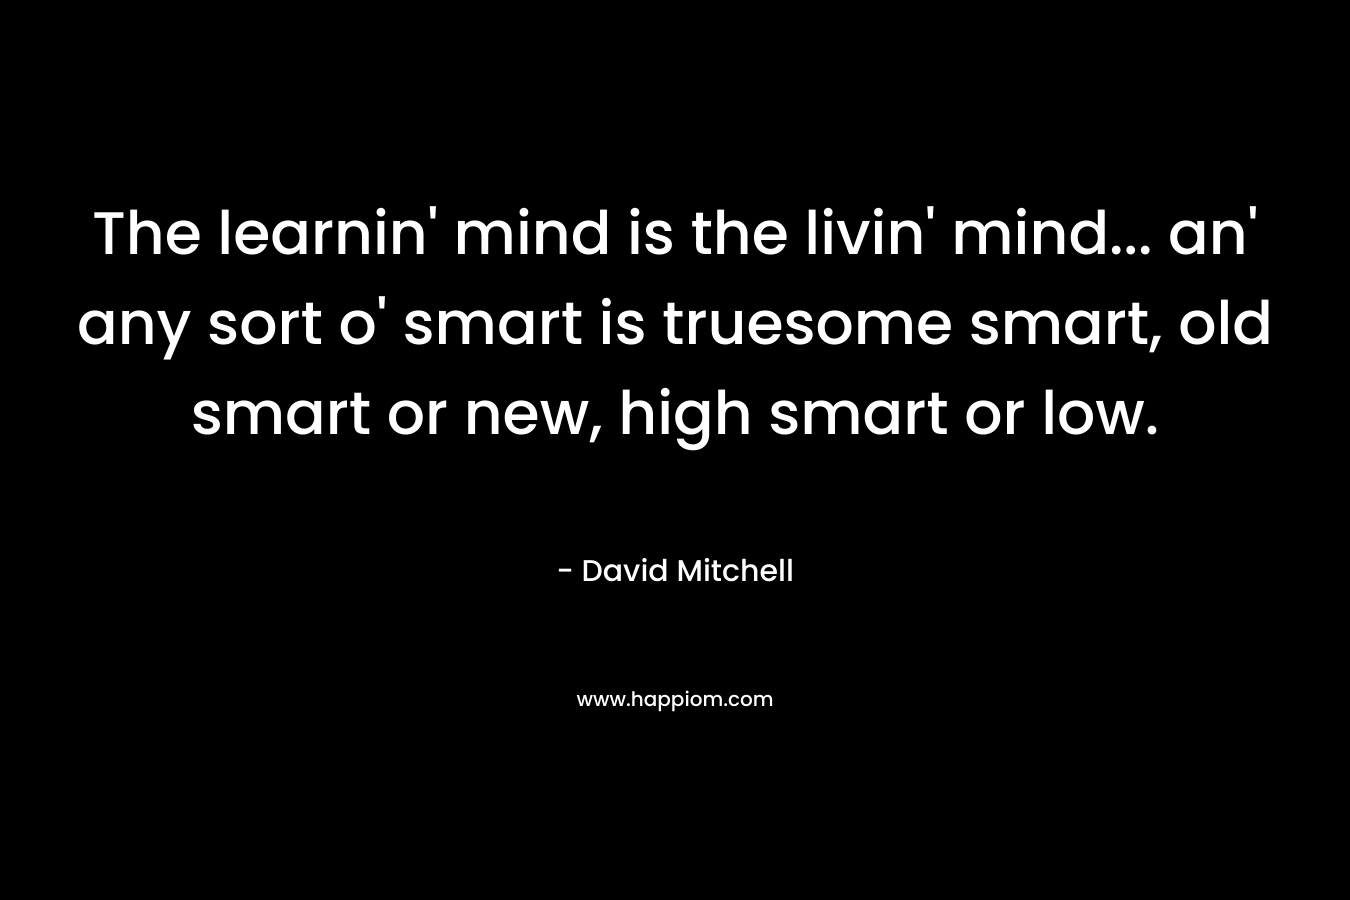 The learnin' mind is the livin' mind... an' any sort o' smart is truesome smart, old smart or new, high smart or low.